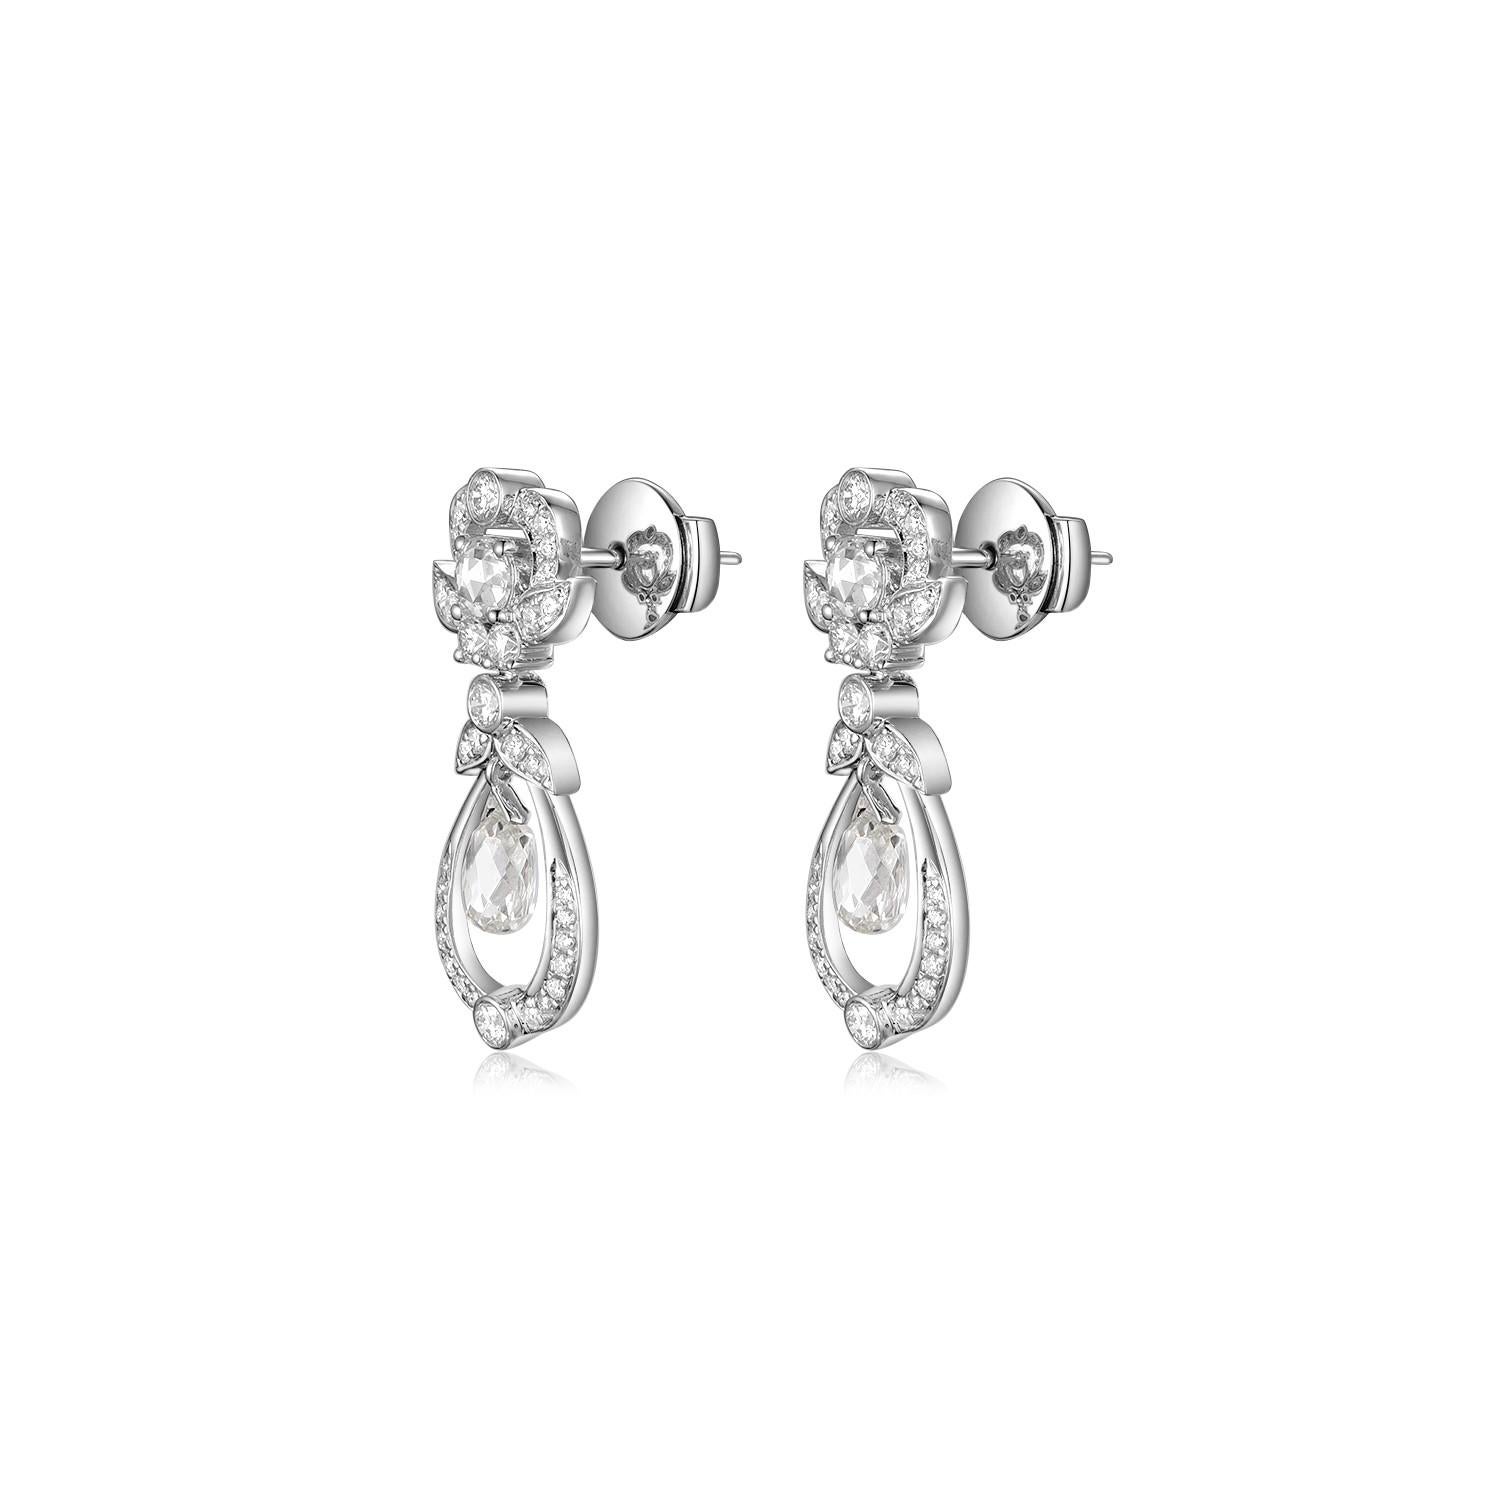 Experience the elegance of timeless design with these captivating earrings, a true testament to fine craftsmanship and luxury. The highlight of these earrings is the two rose cut diamonds weighing a total of 0.29 carat, poised gracefully on top.